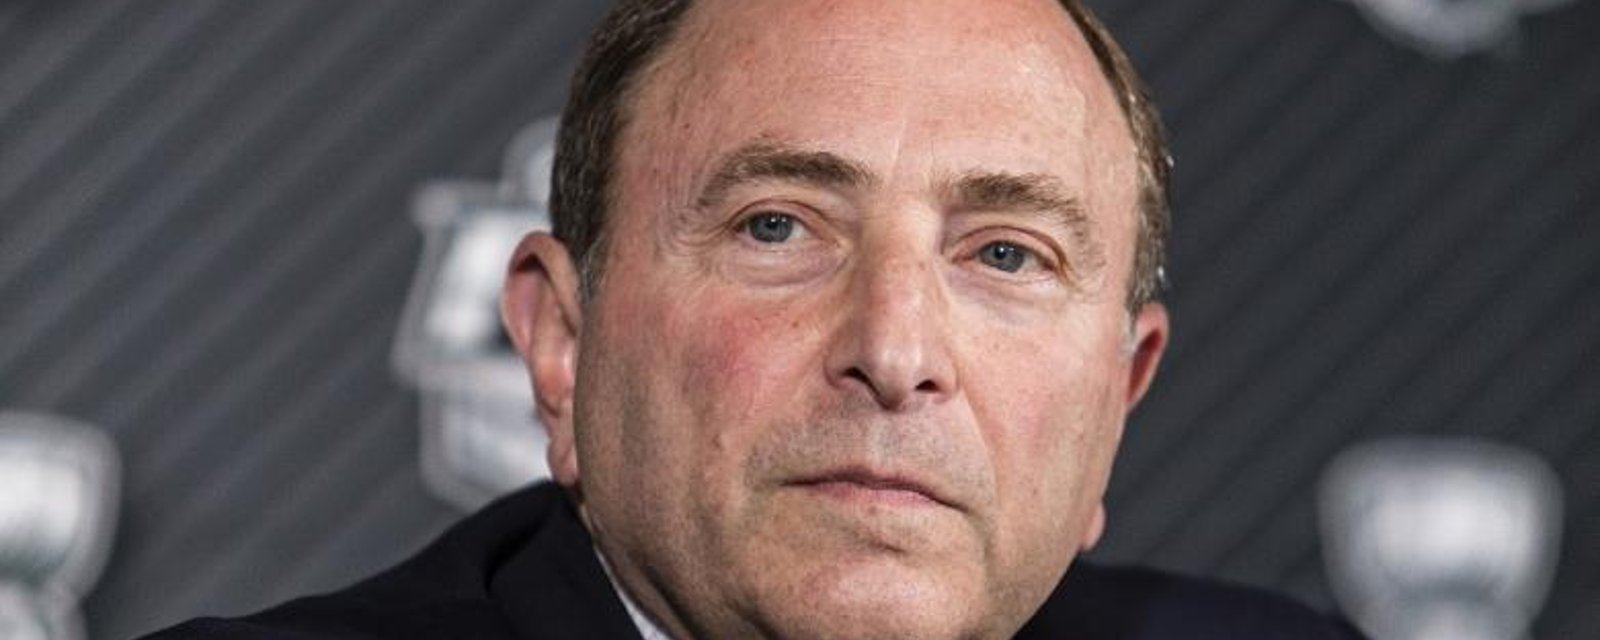 NHL fan loses bet, and gets a really brutal Bettman tattoo.